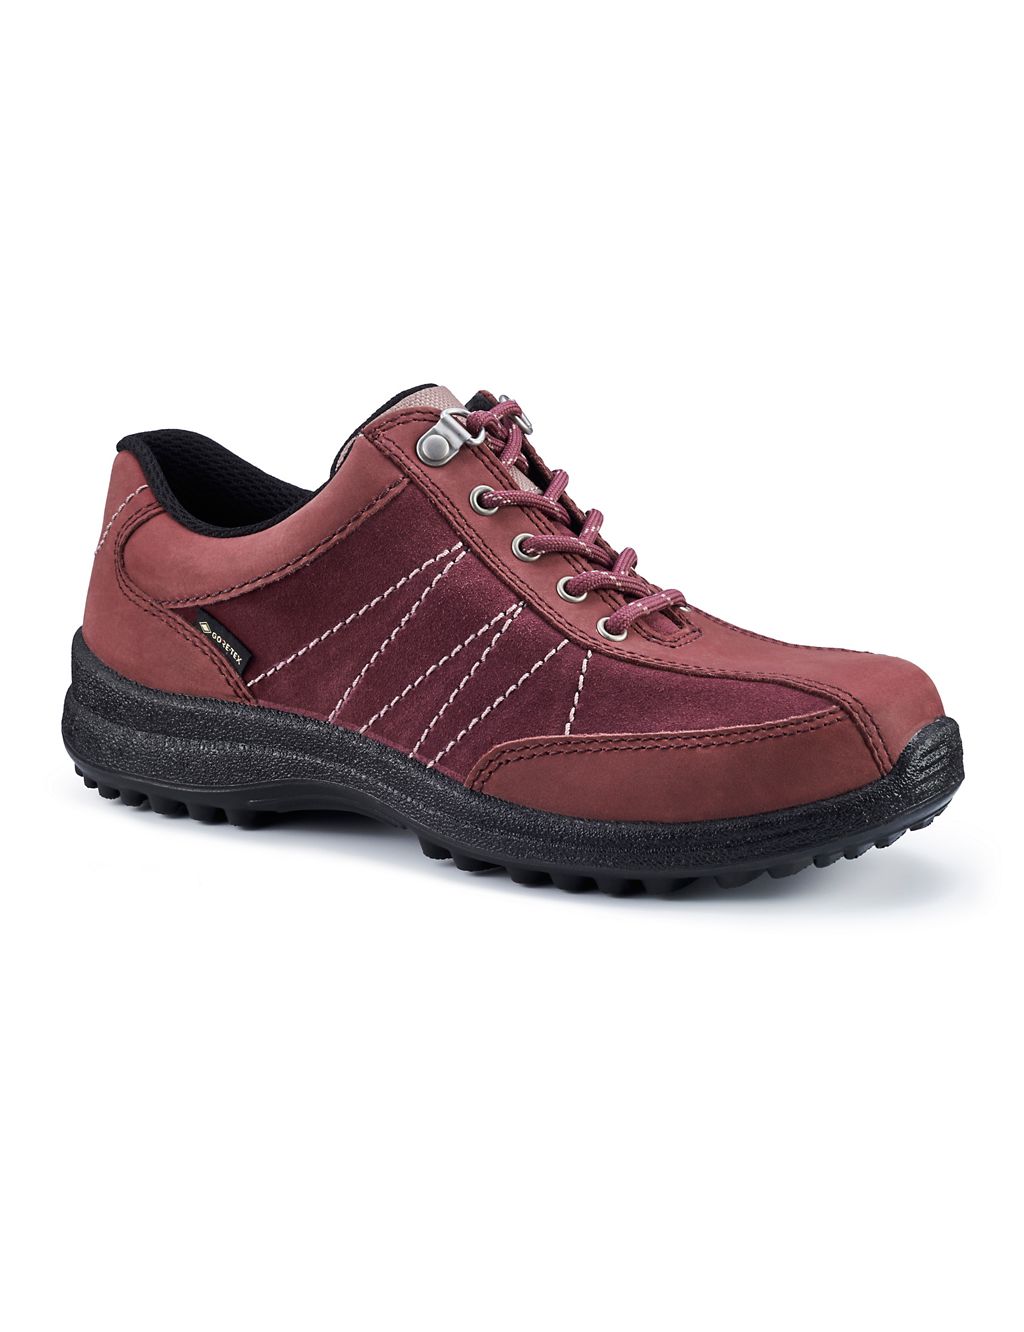 Mist Gore-Tex Suede Lace Up Walking Shoes 1 of 4